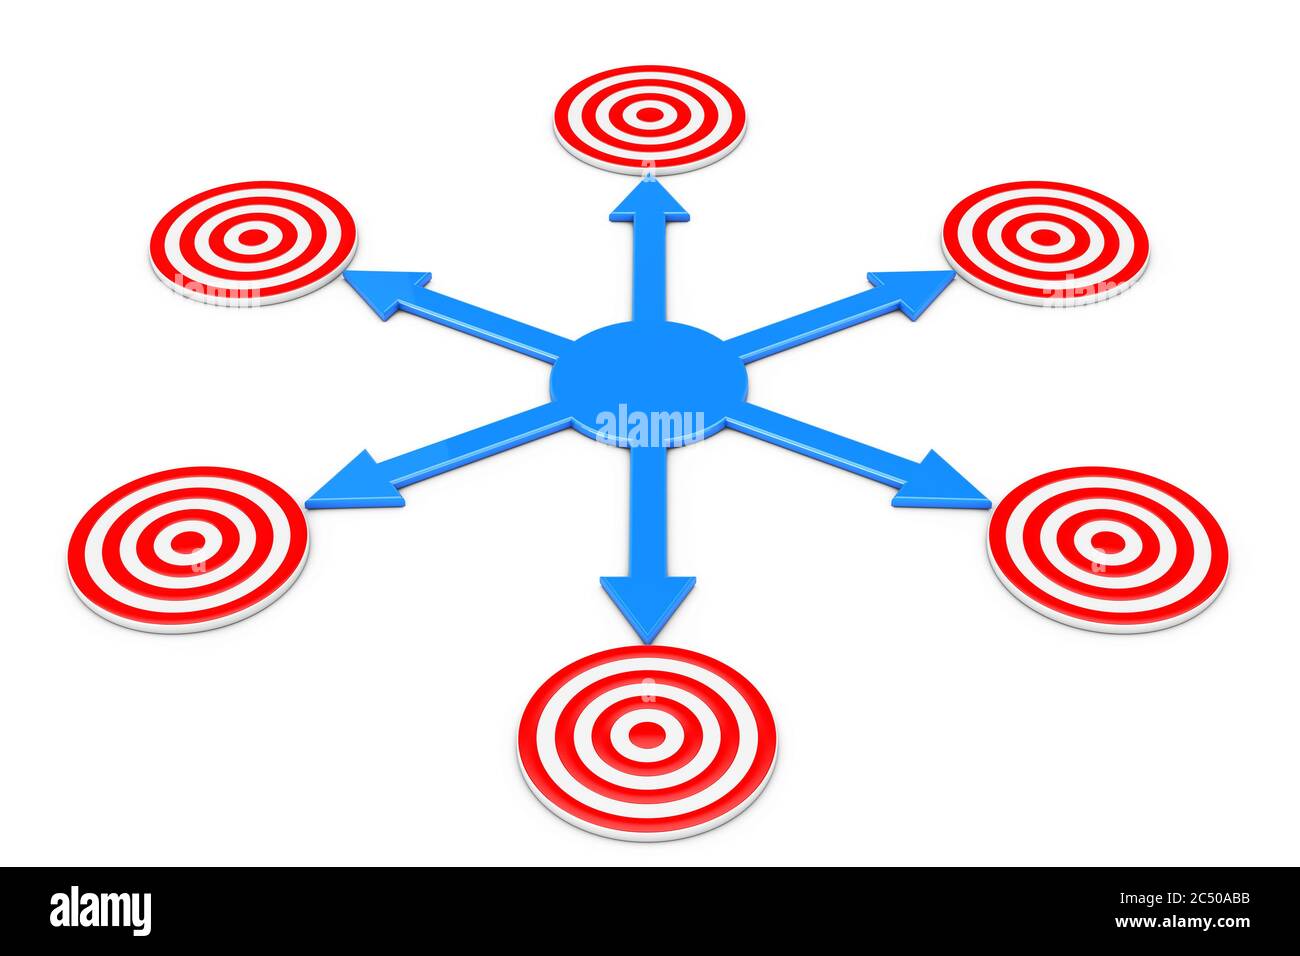 Blue Arrows as Different Ways to Targets on a white background. 3d Rendering. Stock Photo